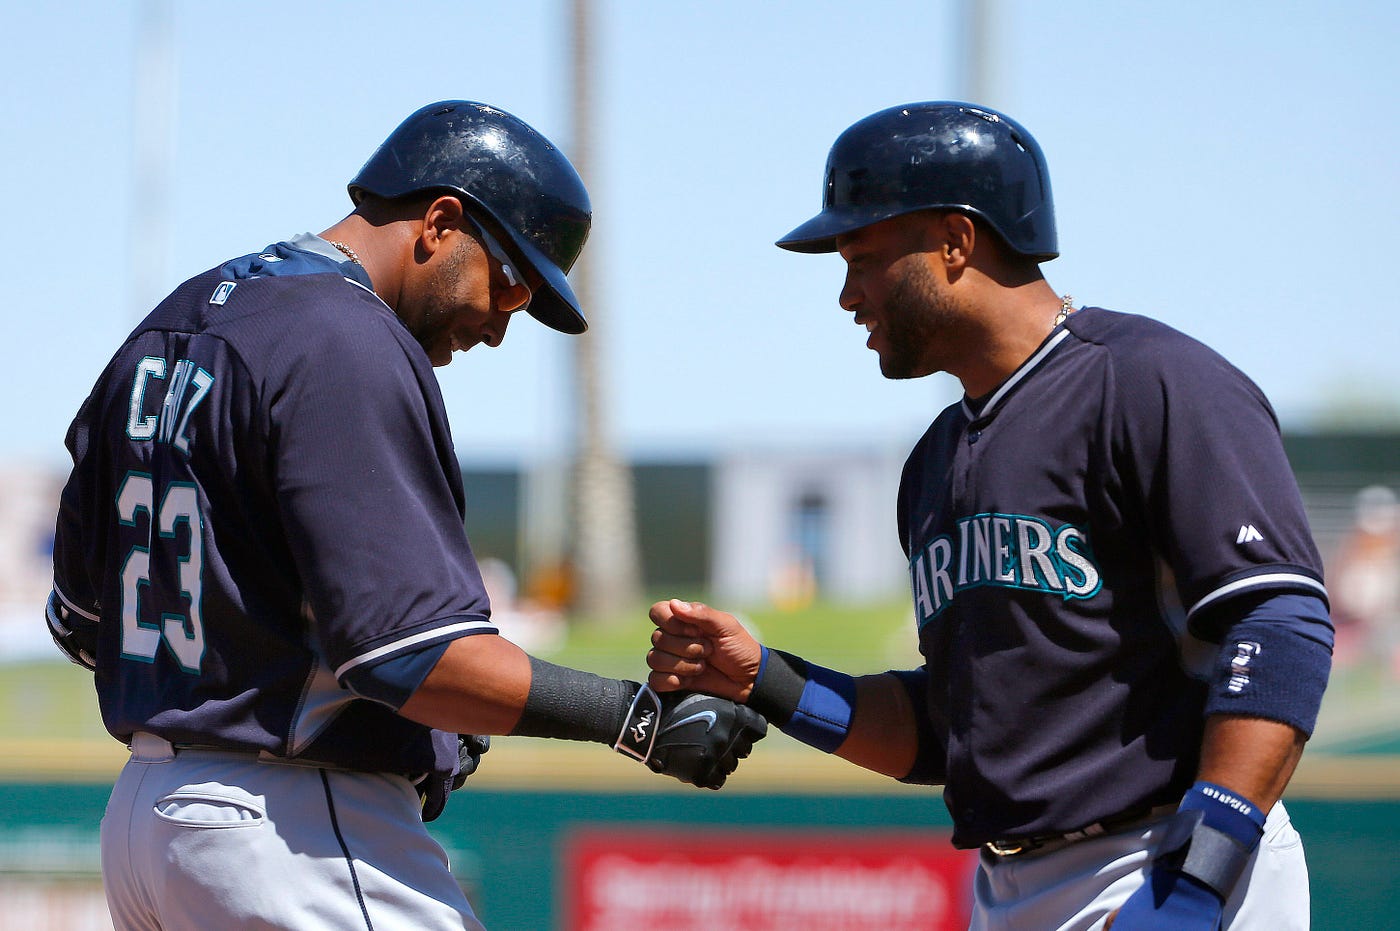 Mariners Spring Training Update — Day 40, by Mariners PR